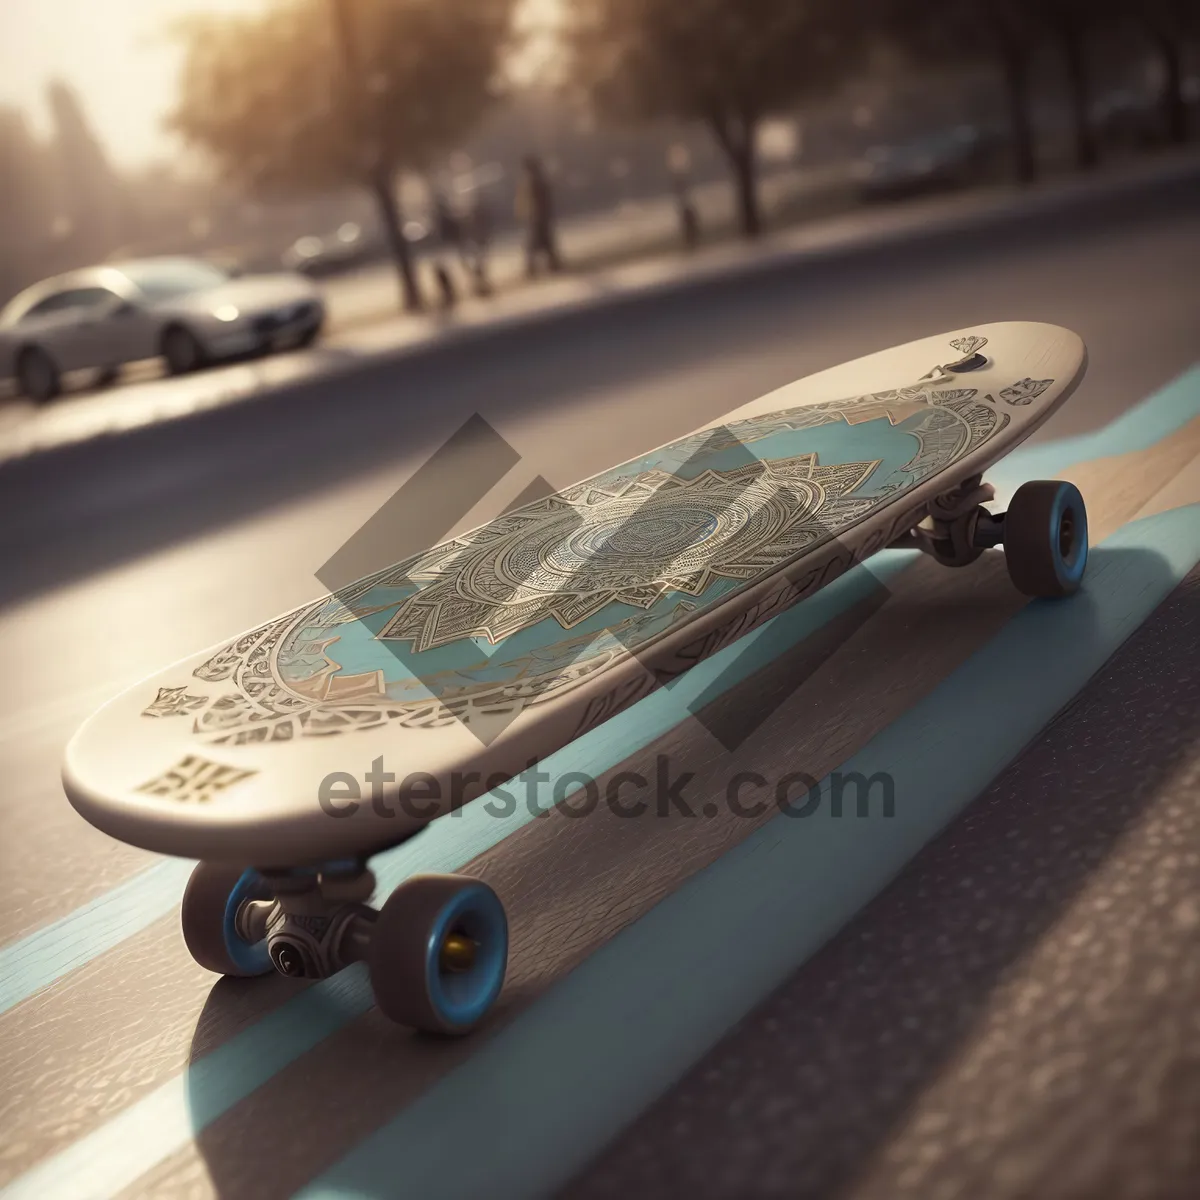 Picture of Skateboard: Wheeled Vehicle Conveyance